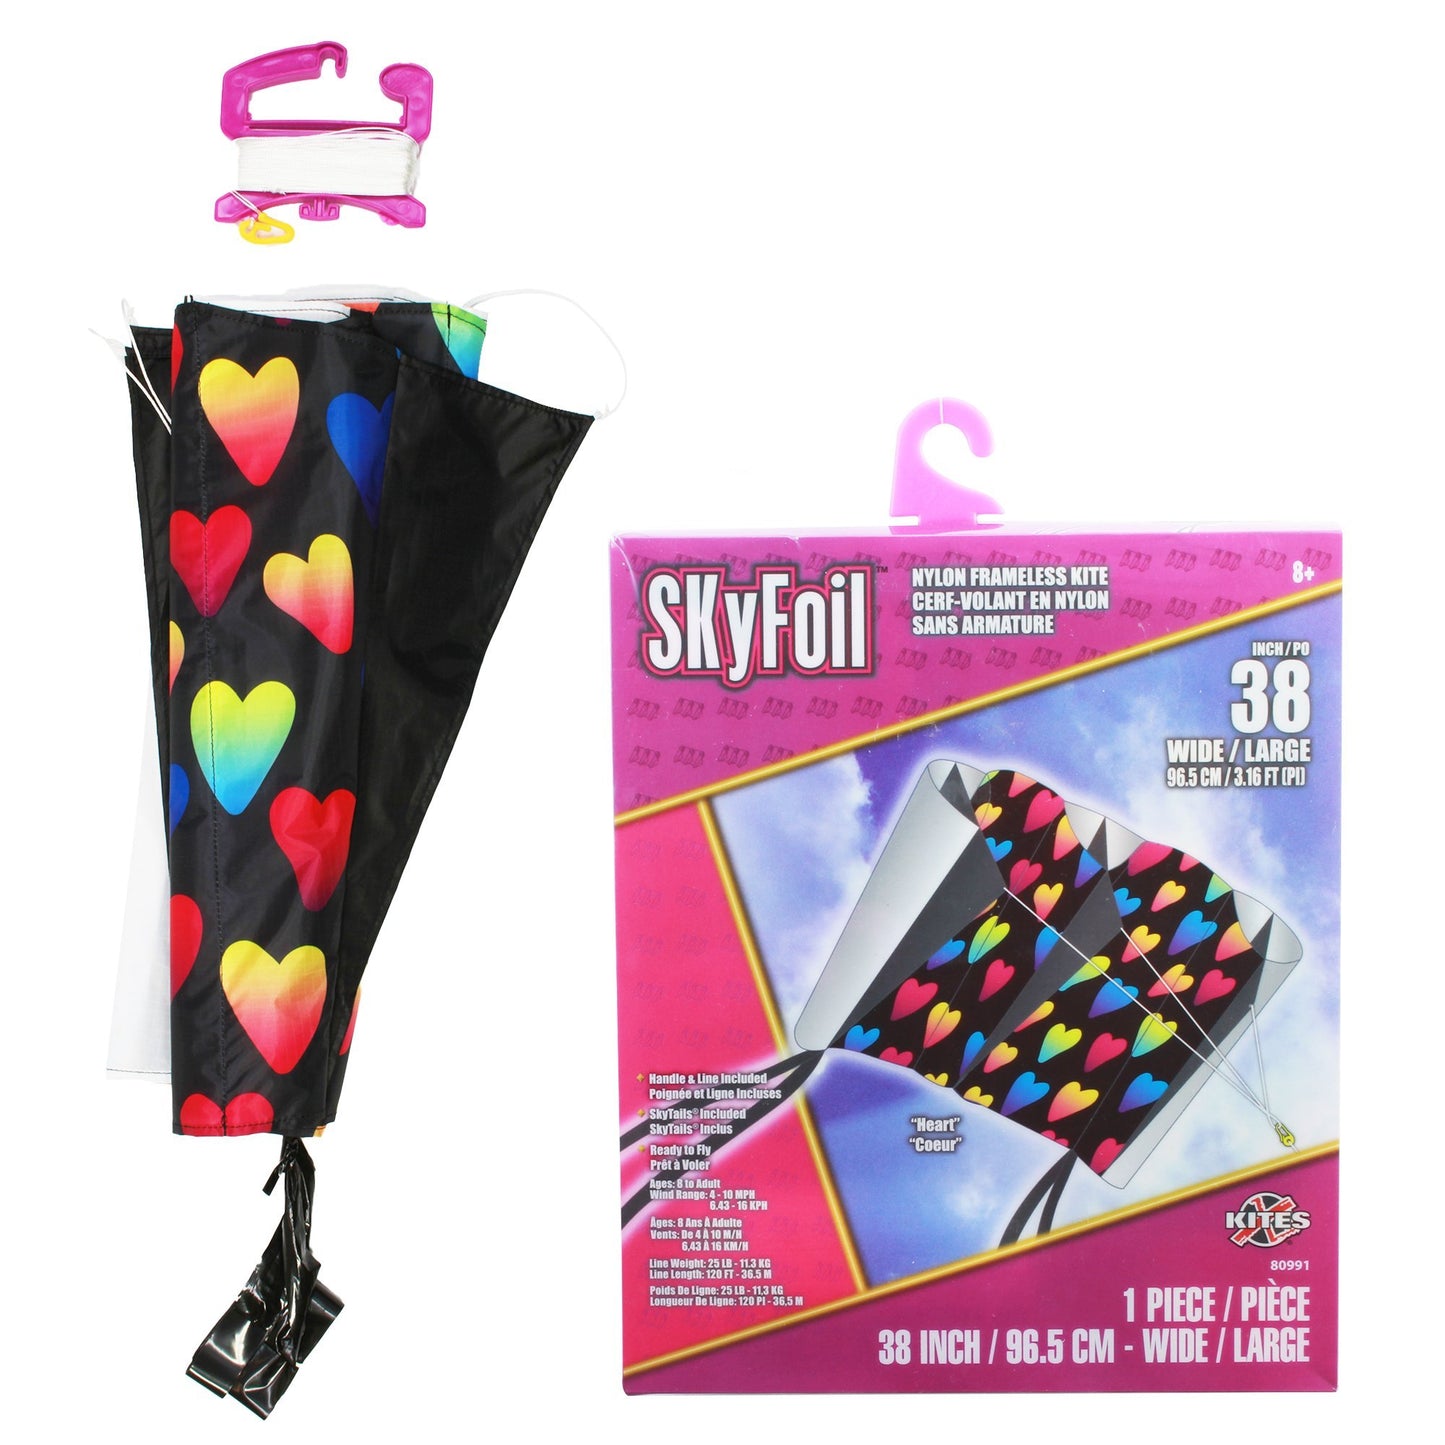 X Kites SkyFoil Hearts + Pocket Kite Circles Parafoil Kite Bundle - No Assembly Required packaging and contents